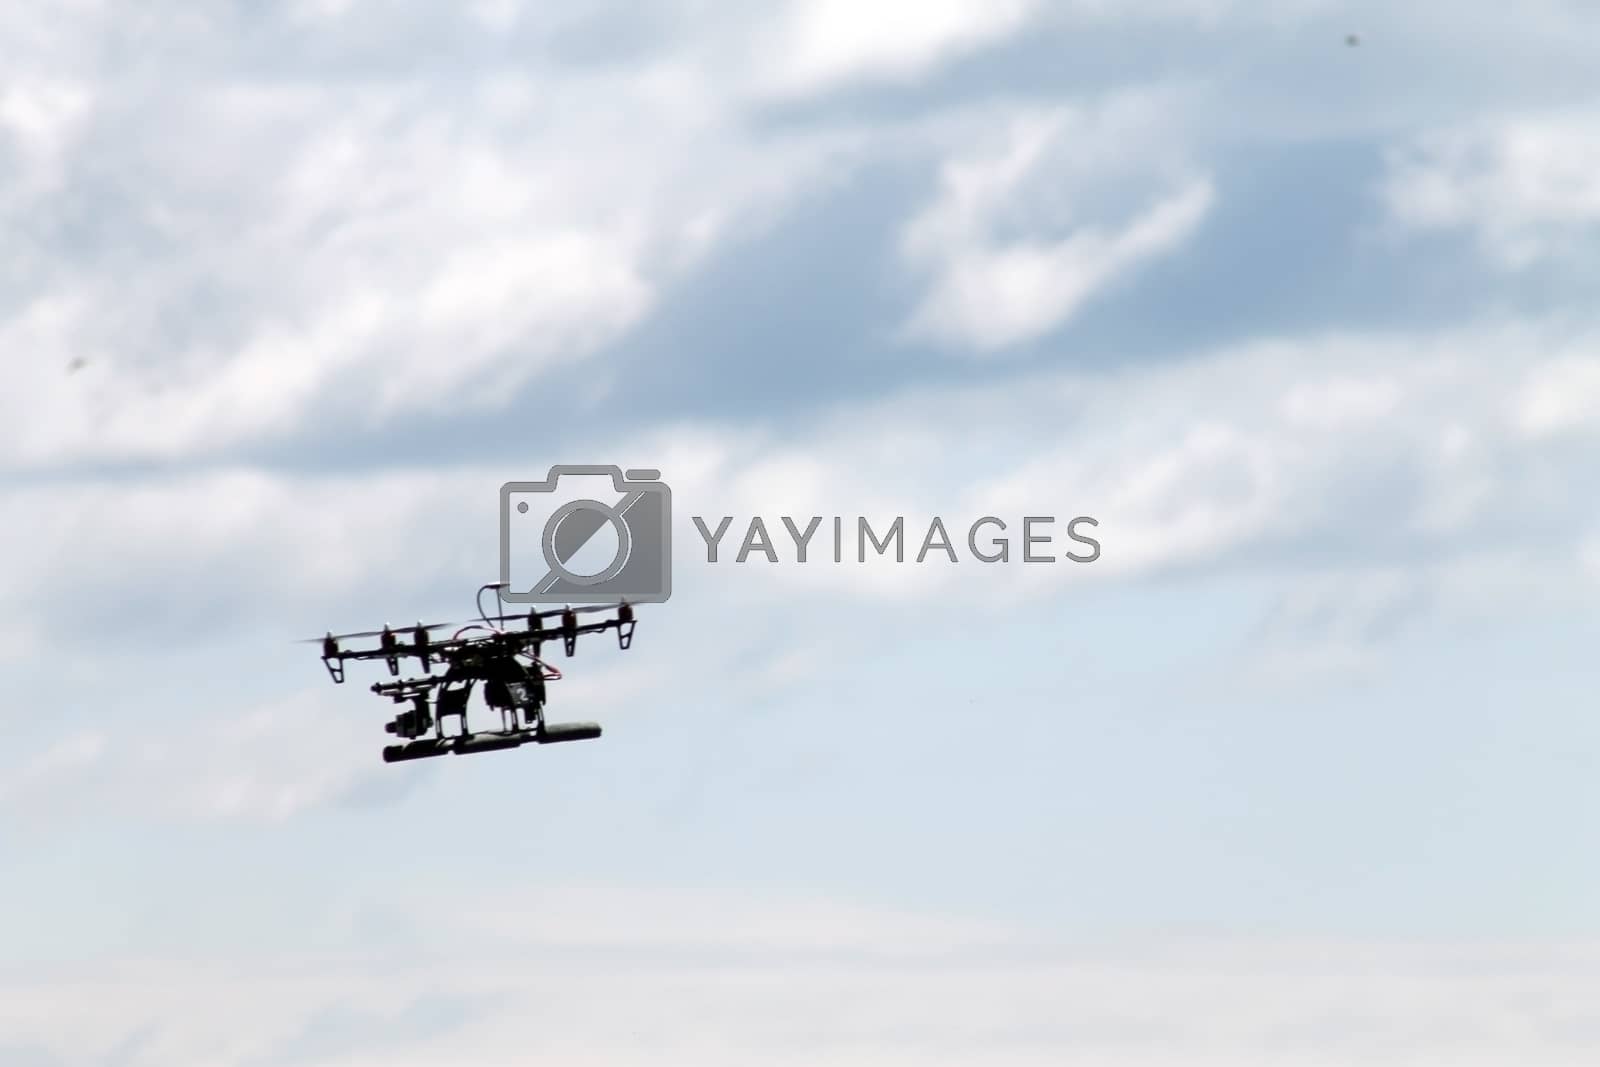 Royalty free image of model drone by hicster